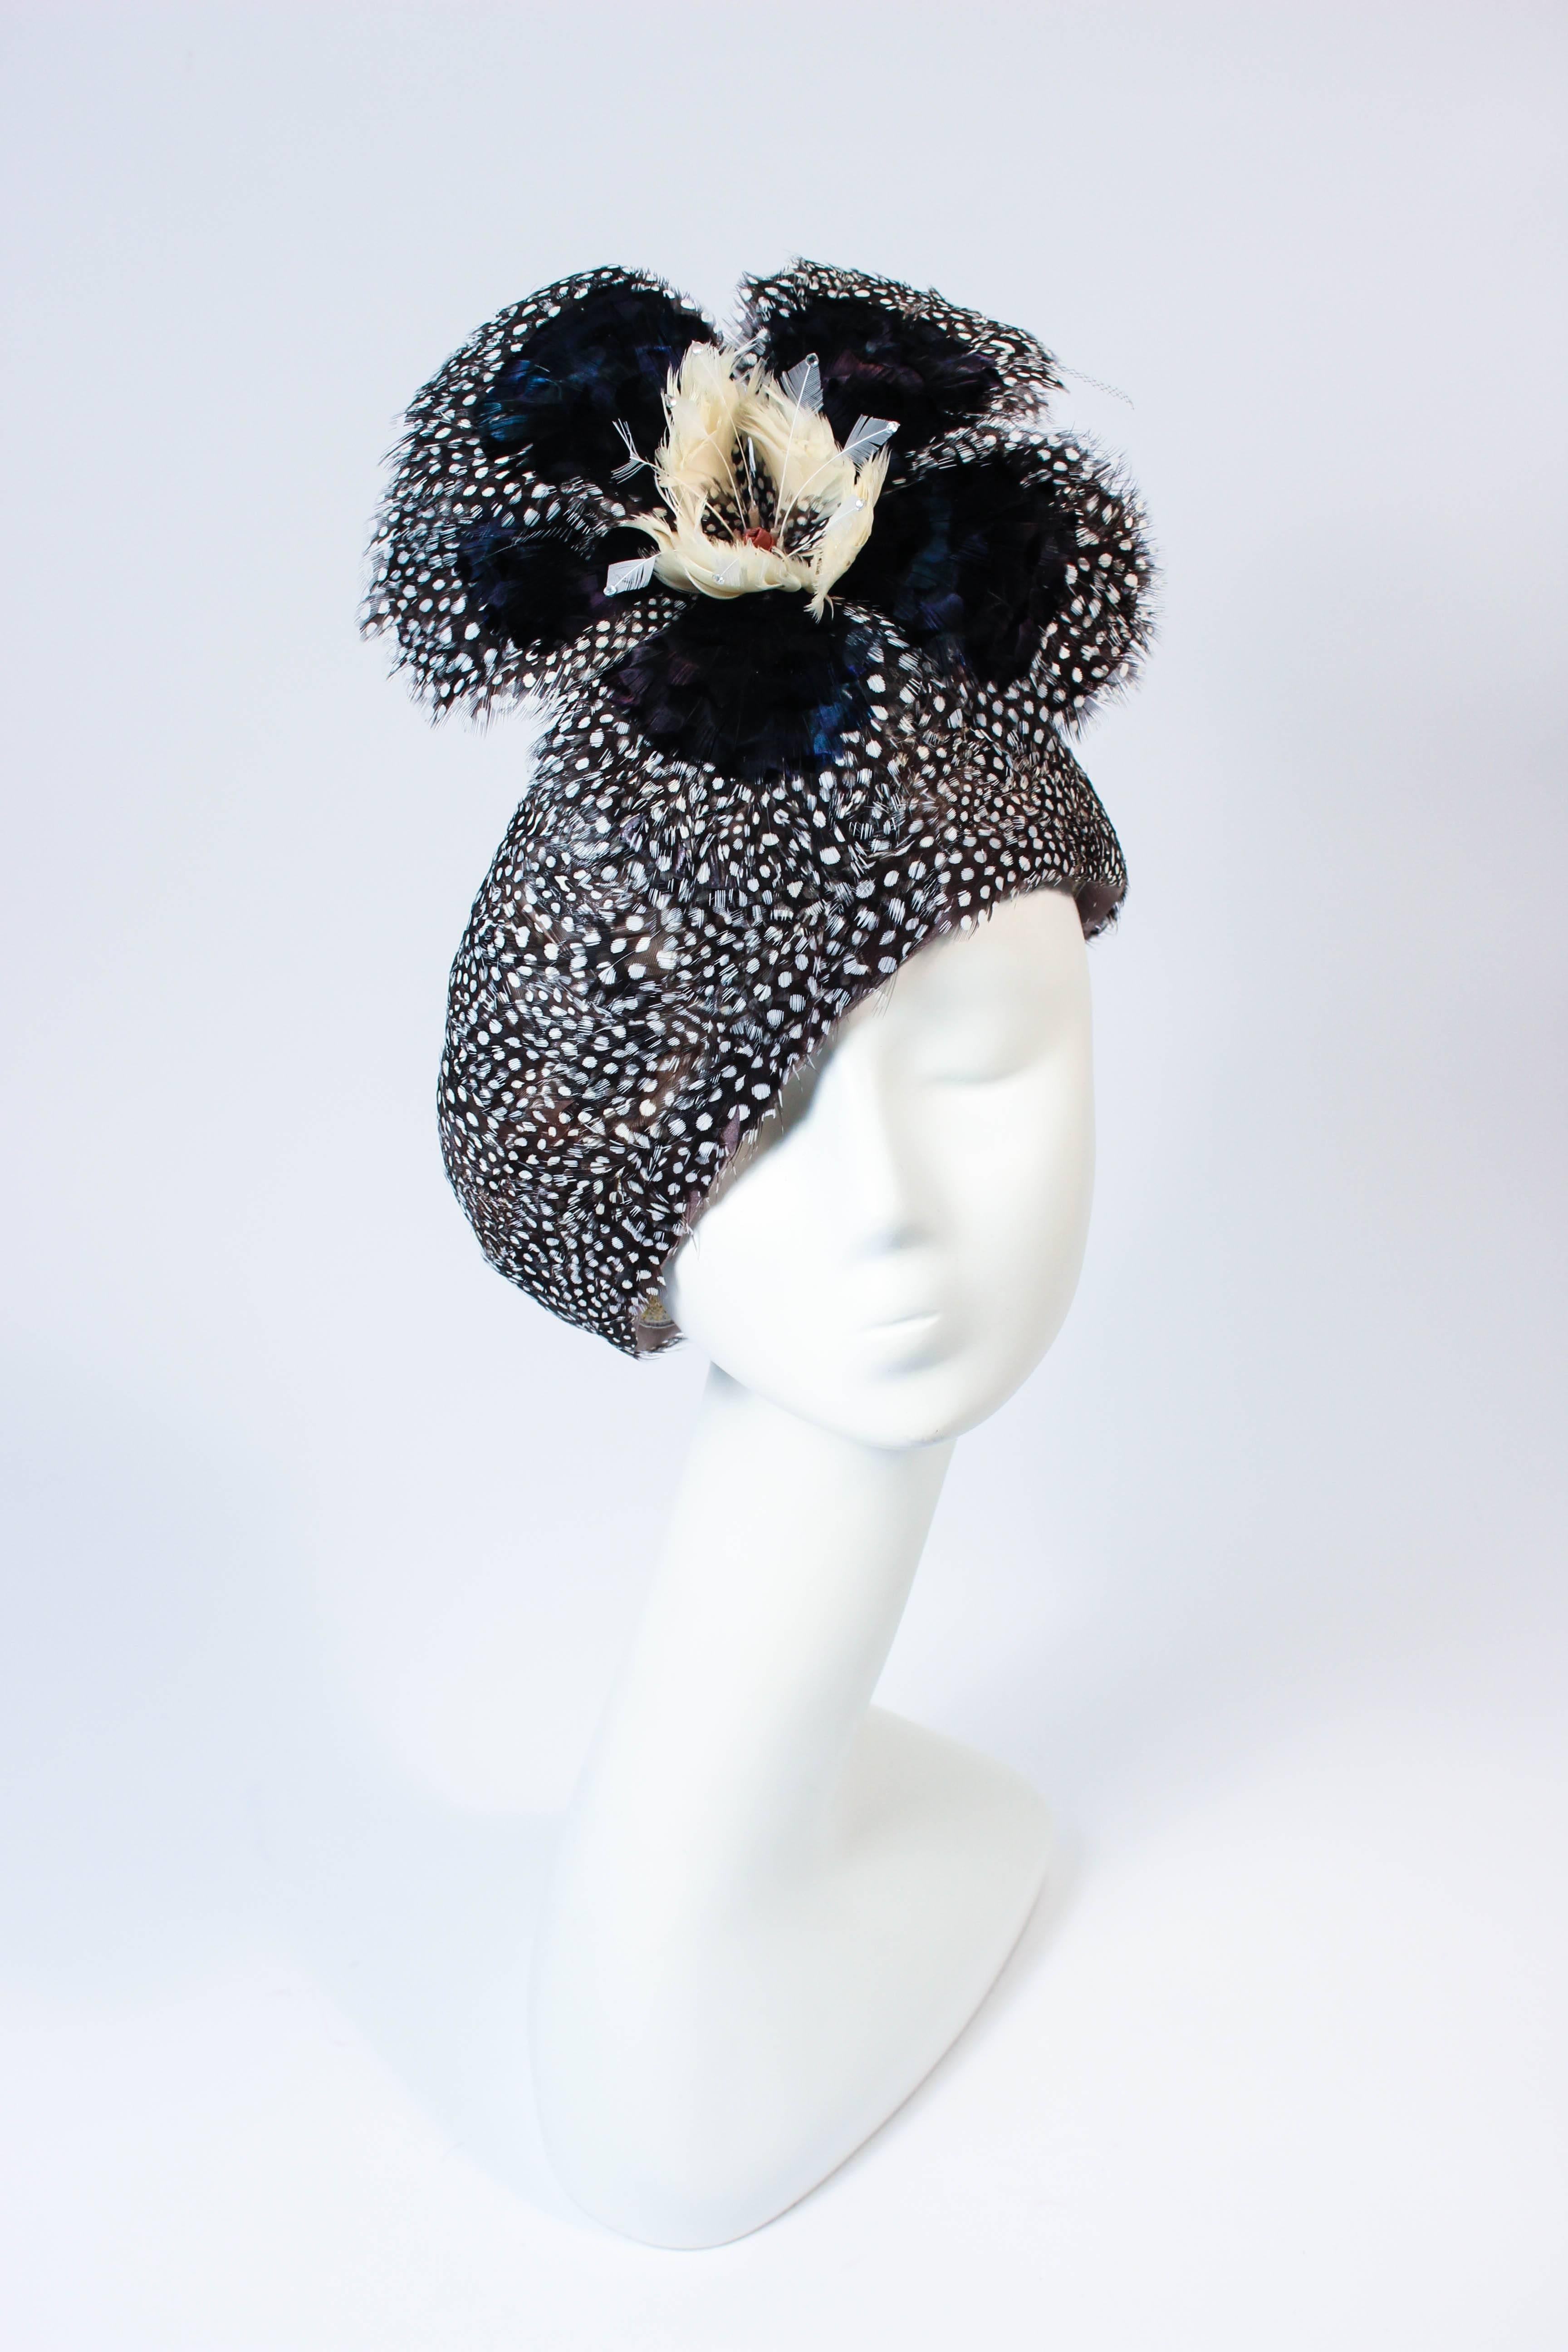 This Jack McConnell hat s composed of a stunning array of feathers in navy and cream hues with petite spotted feathers. Features a large flower with rhinestone applique. In excellent vintage condition.

**Please cross-reference measurements for